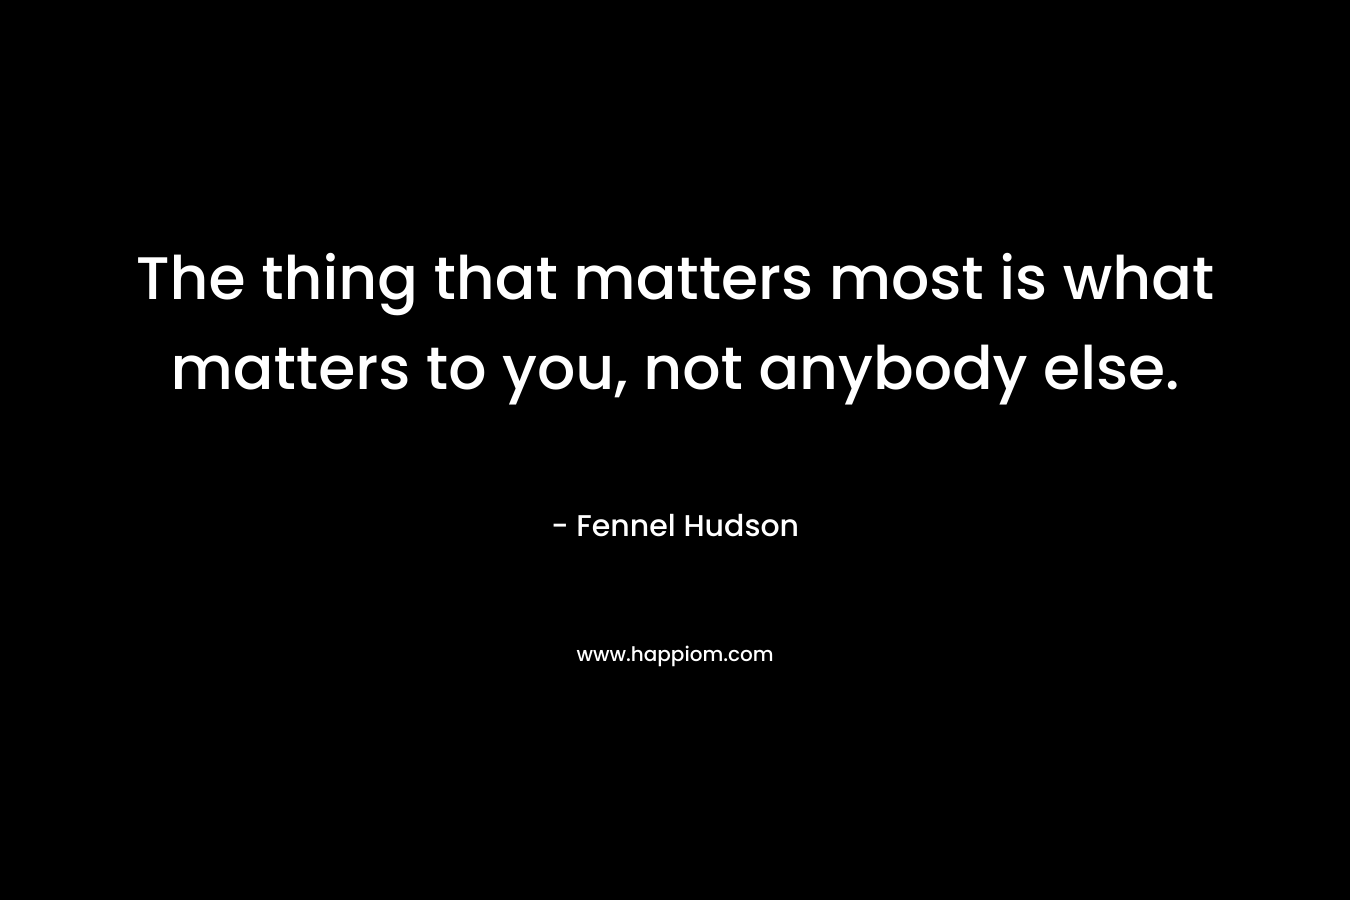 The thing that matters most is what matters to you, not anybody else.